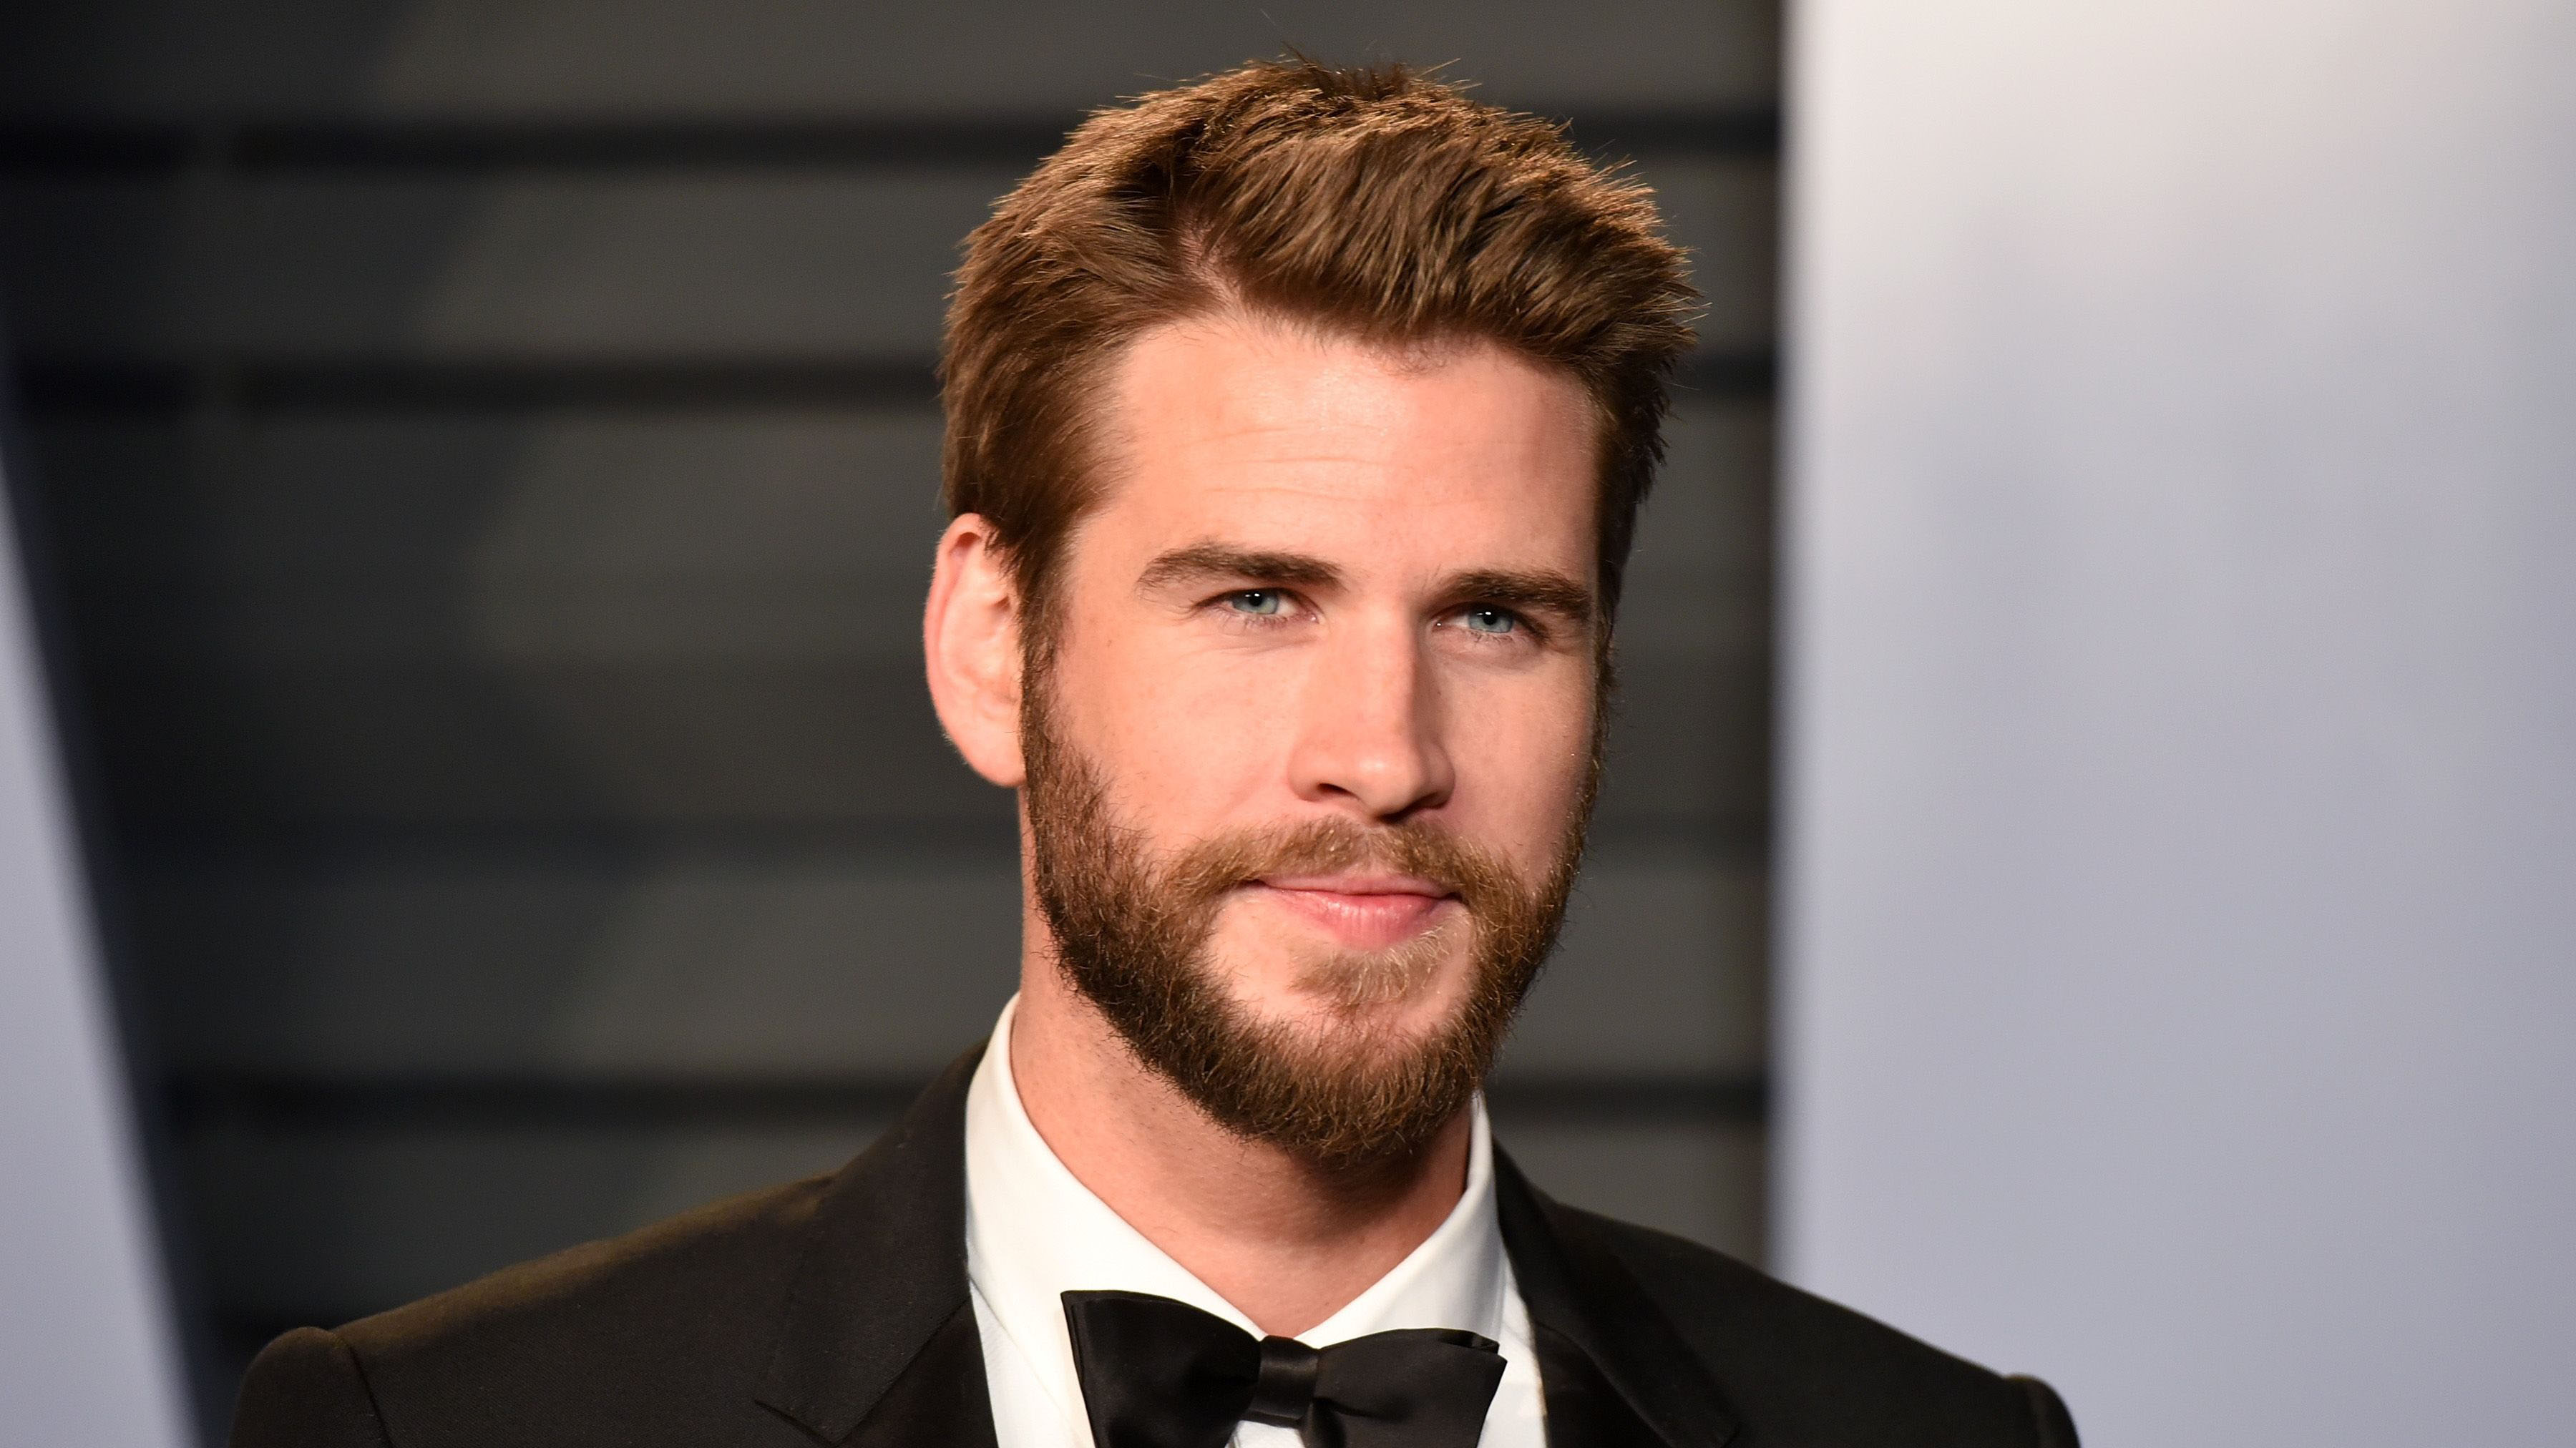 Liam Hemsworth (born 13 January 1990) is an Australian actor. He played the roles of Josh Taylor in the soap opera Neighbours and Marcus in the childr...